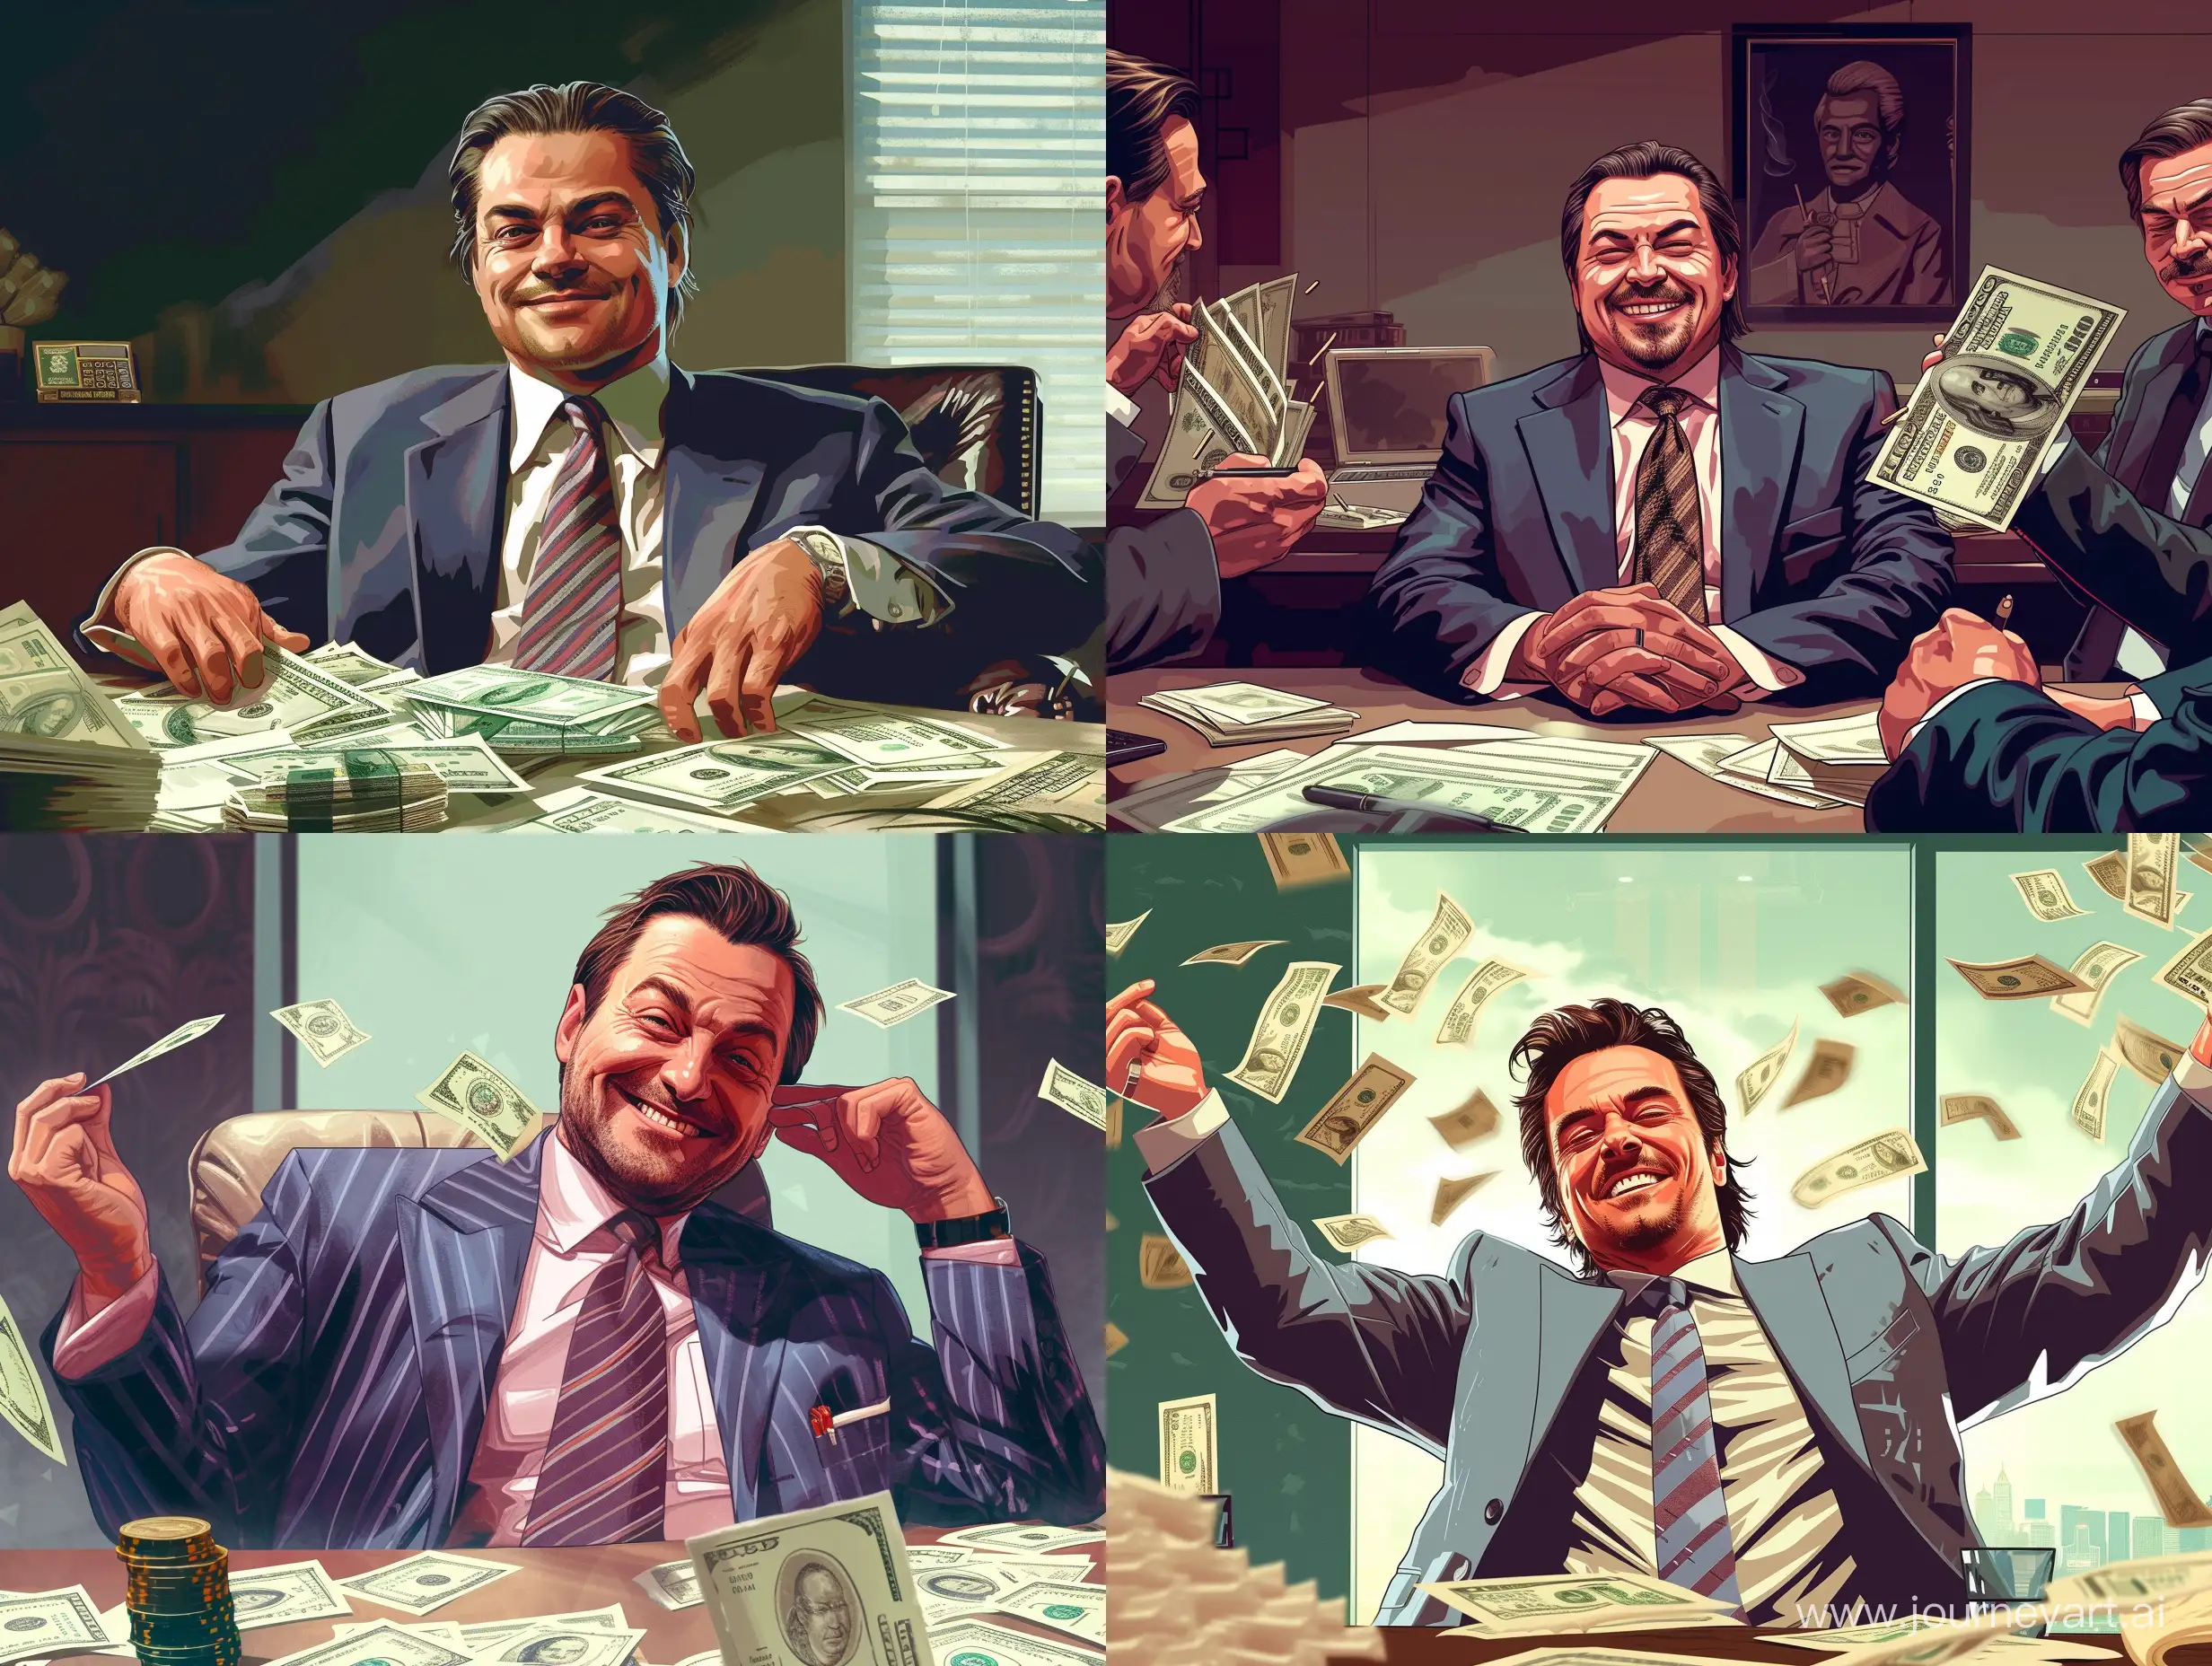 wolf of wall street making deals with confident humble smile, grand theft auto artstyle, loading screen, celshading, highly detailed, studio lighting